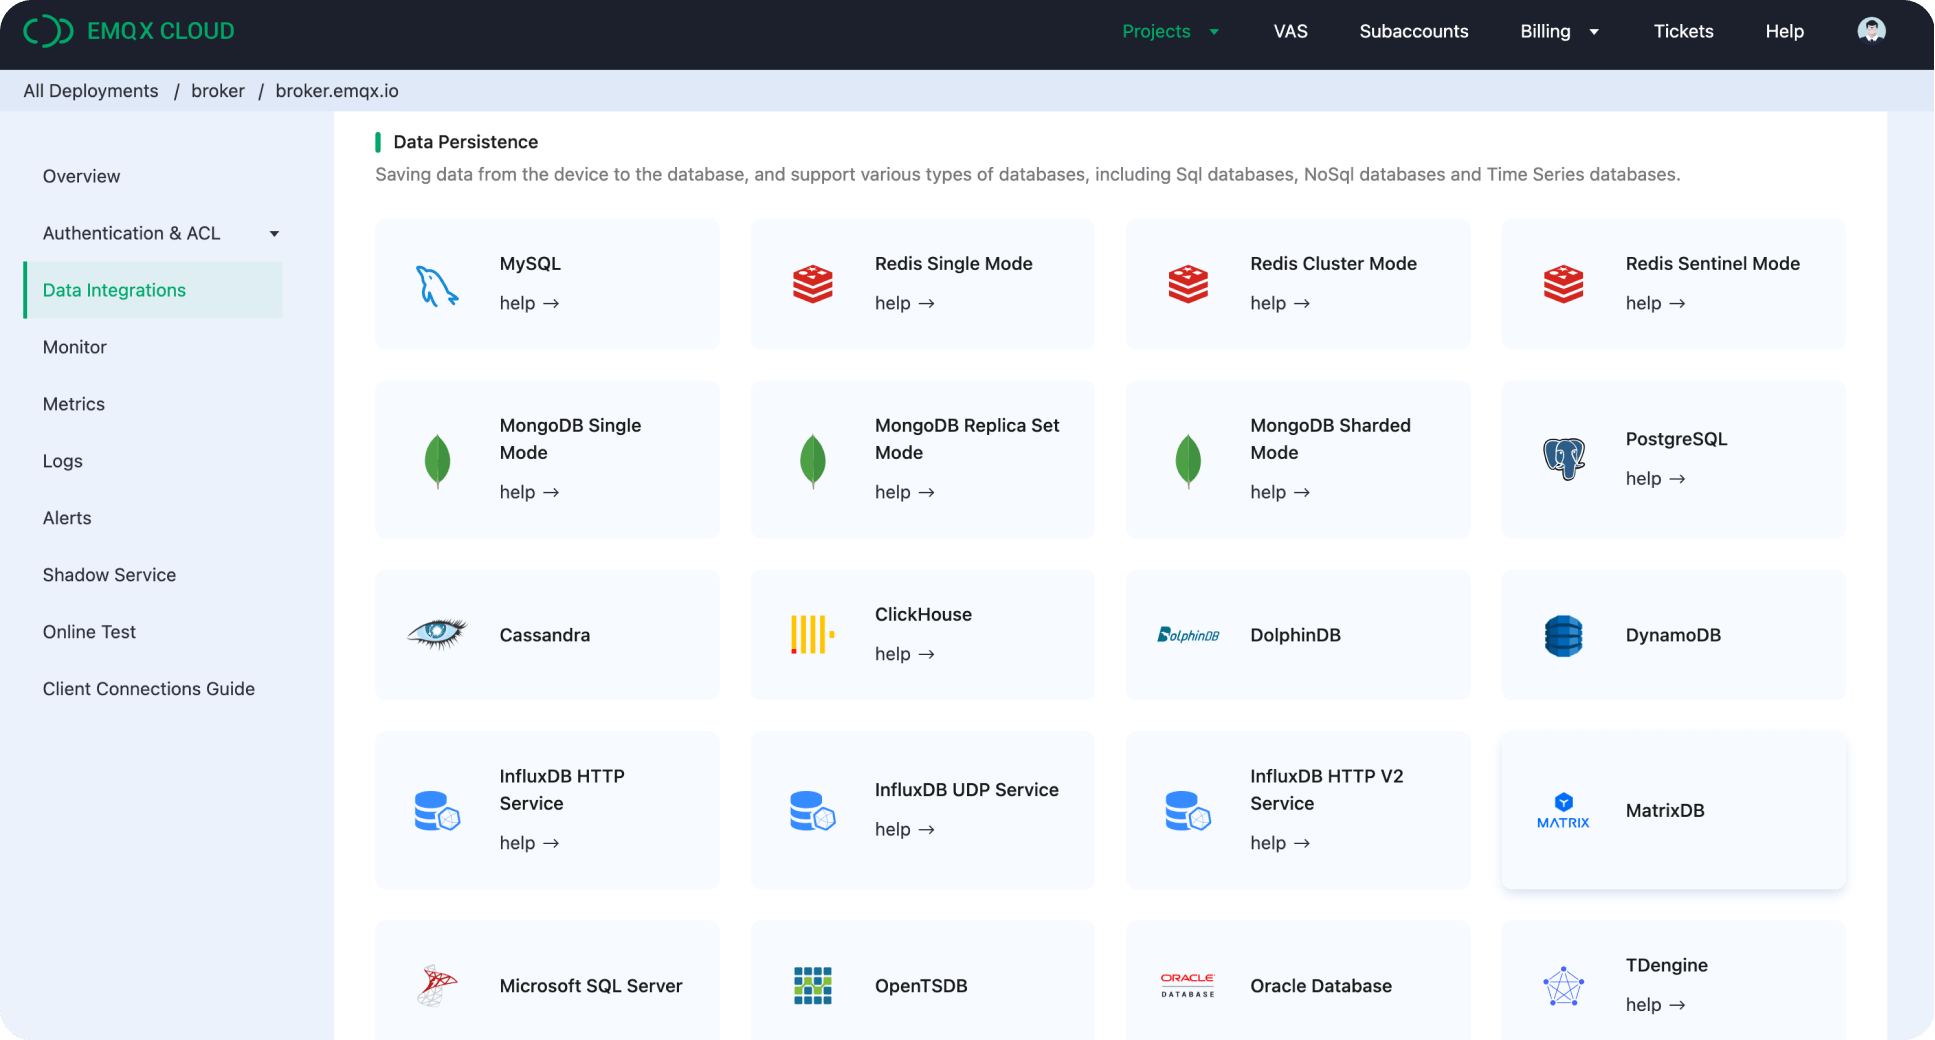 Dashboard Overview 1